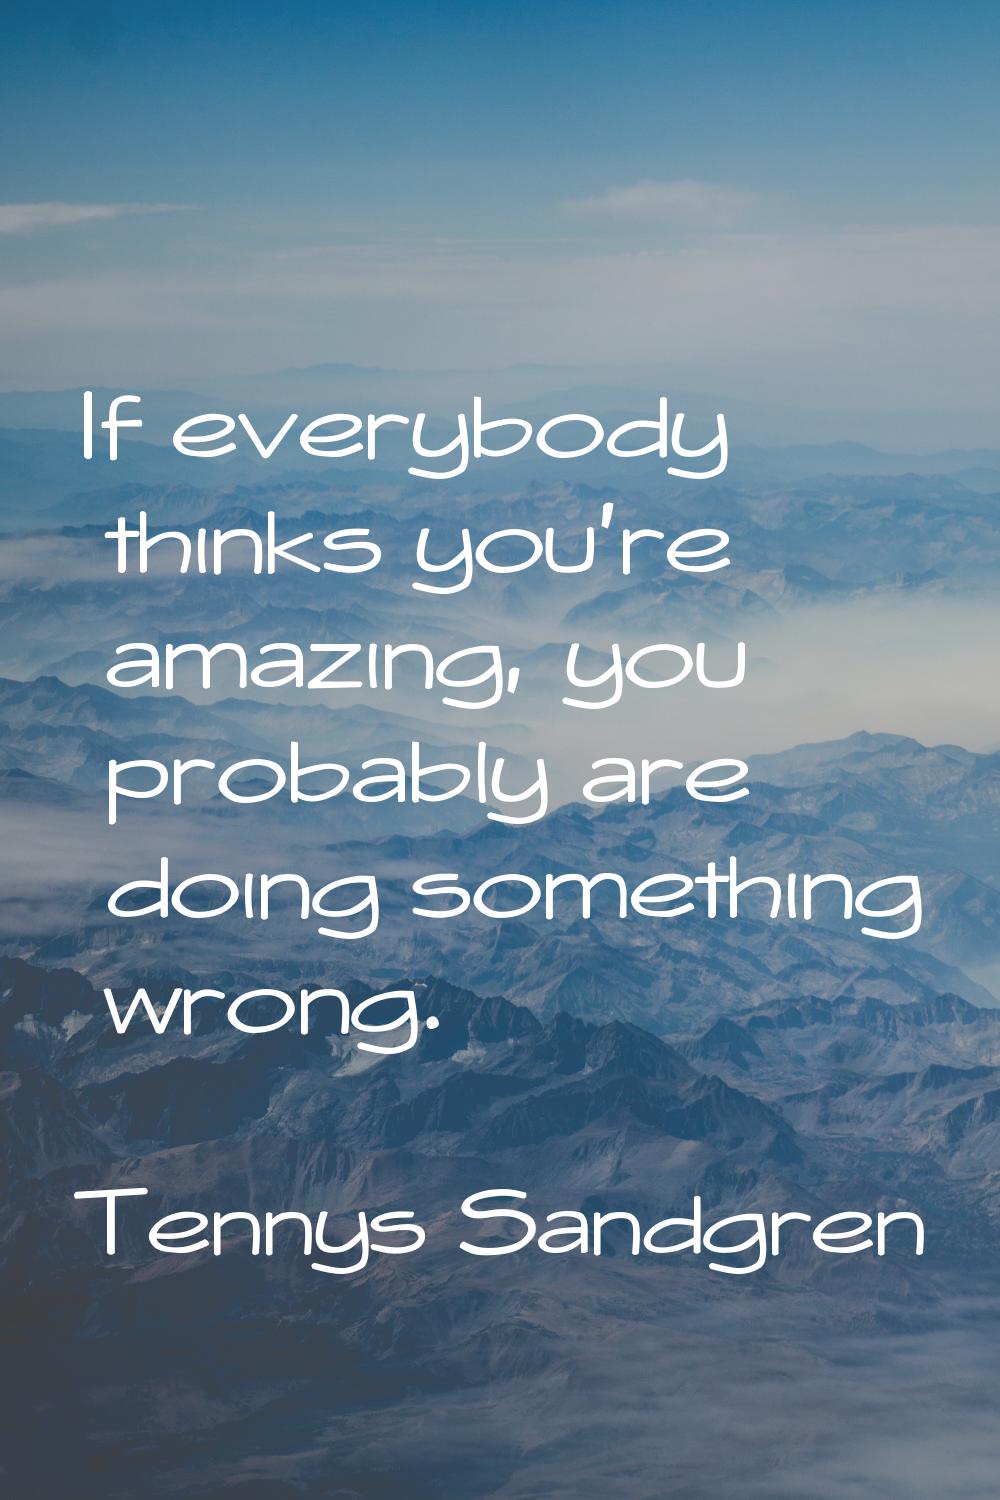 If everybody thinks you're amazing, you probably are doing something wrong.